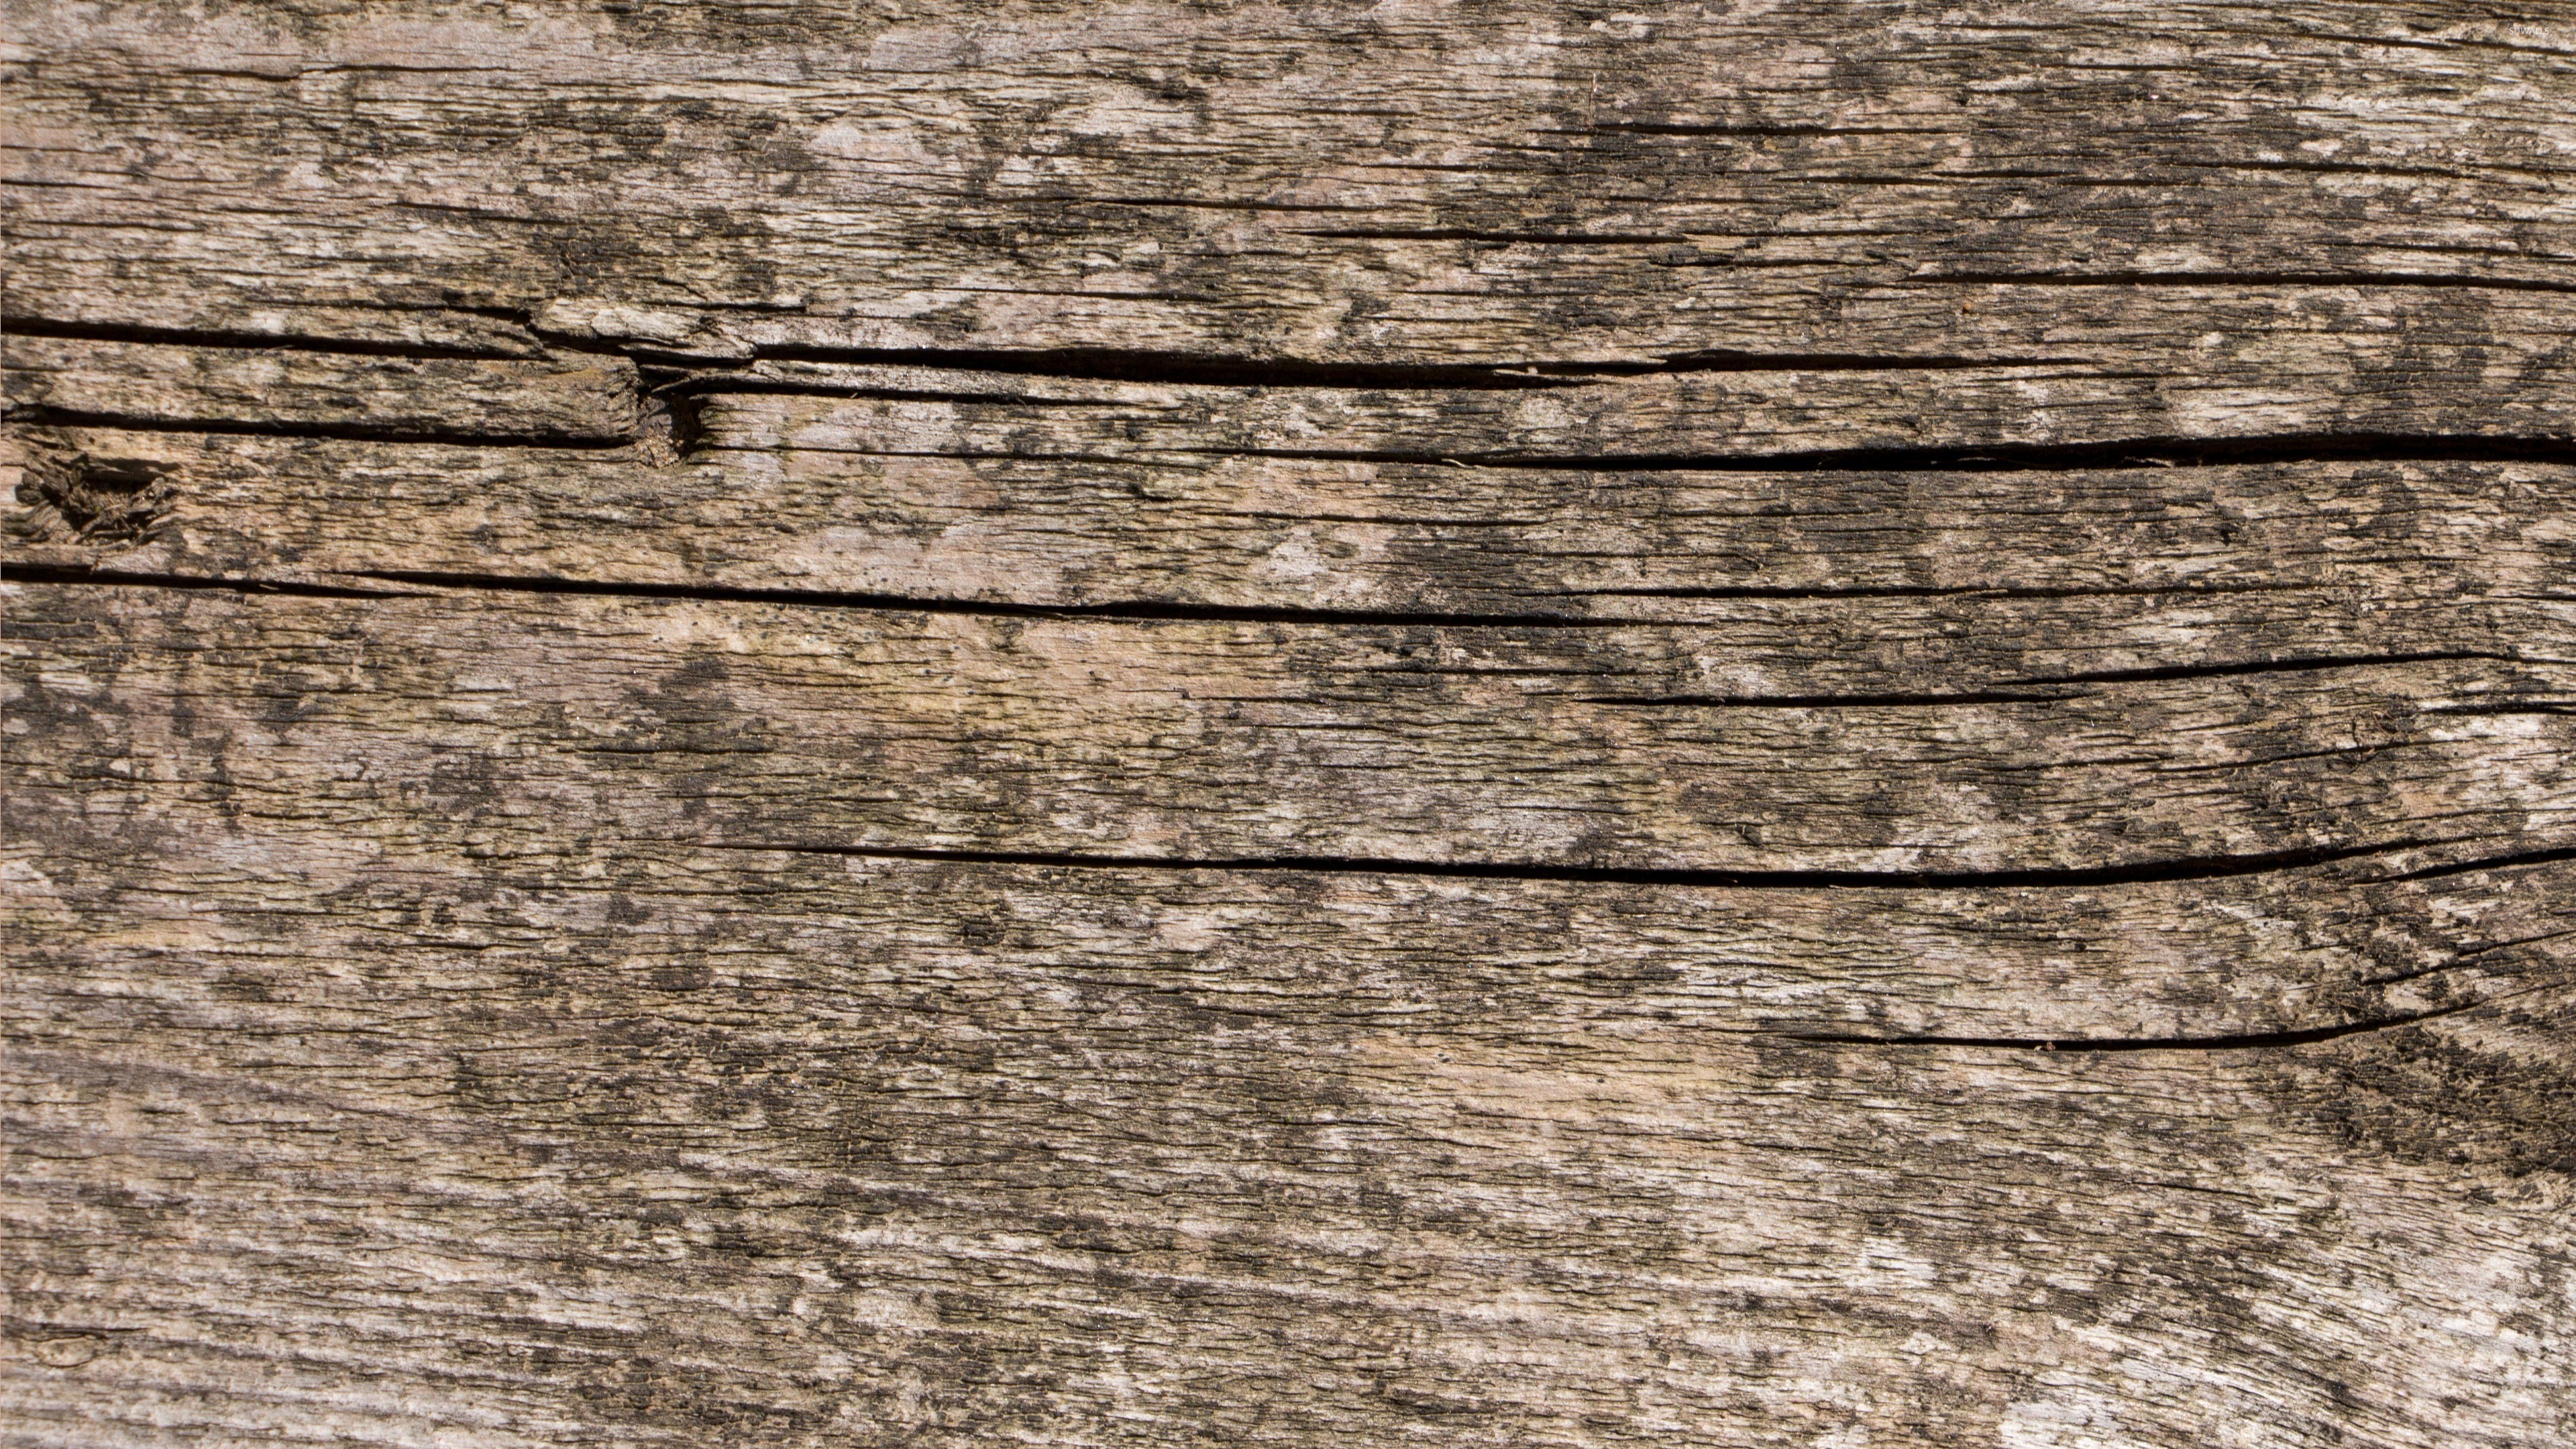 Cracked old wood wallpaper - Photography wallpapers - #48442